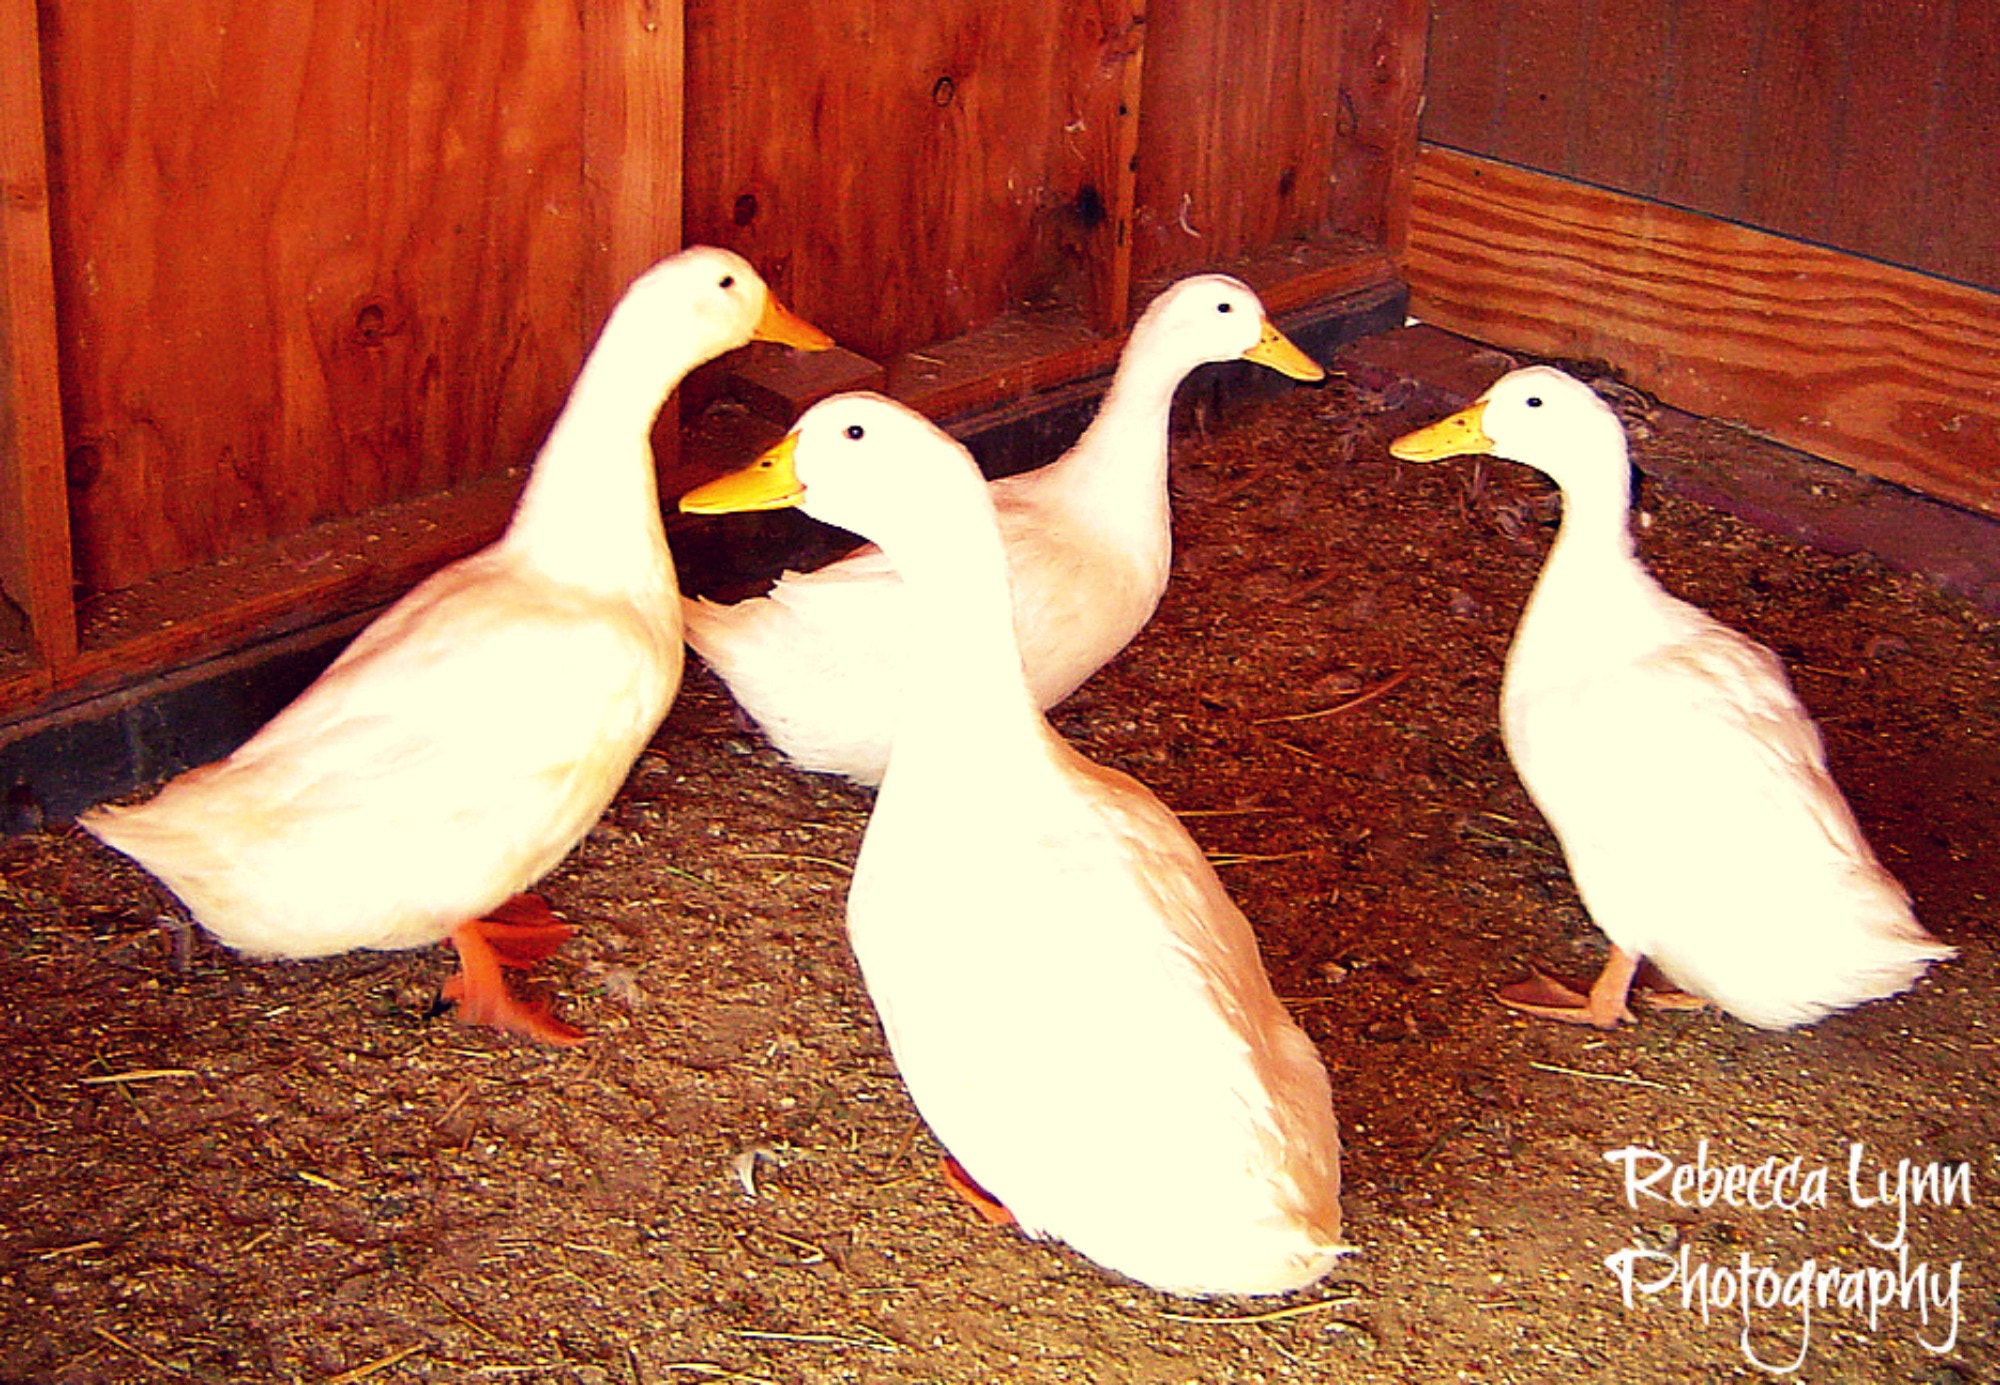 Sony DSC-P72 sample photo. The duck convention photography